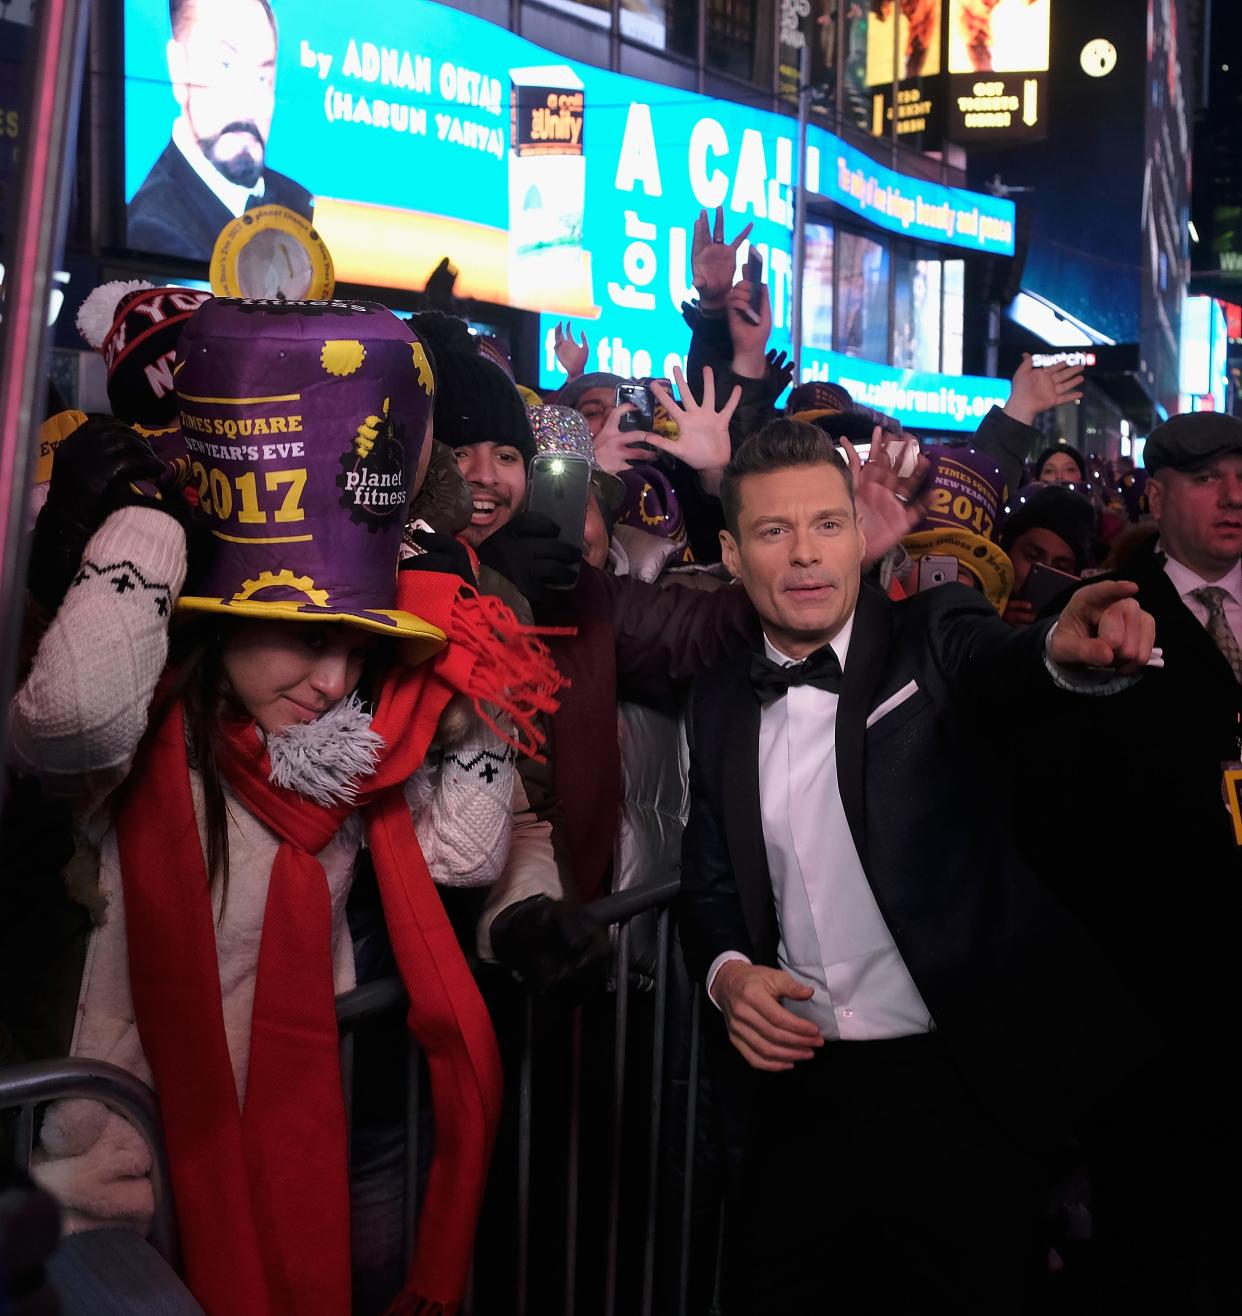 Ryan Seacrest attends New Year's Eve 2017 in Times Square on December 31, 2016 in New York City.